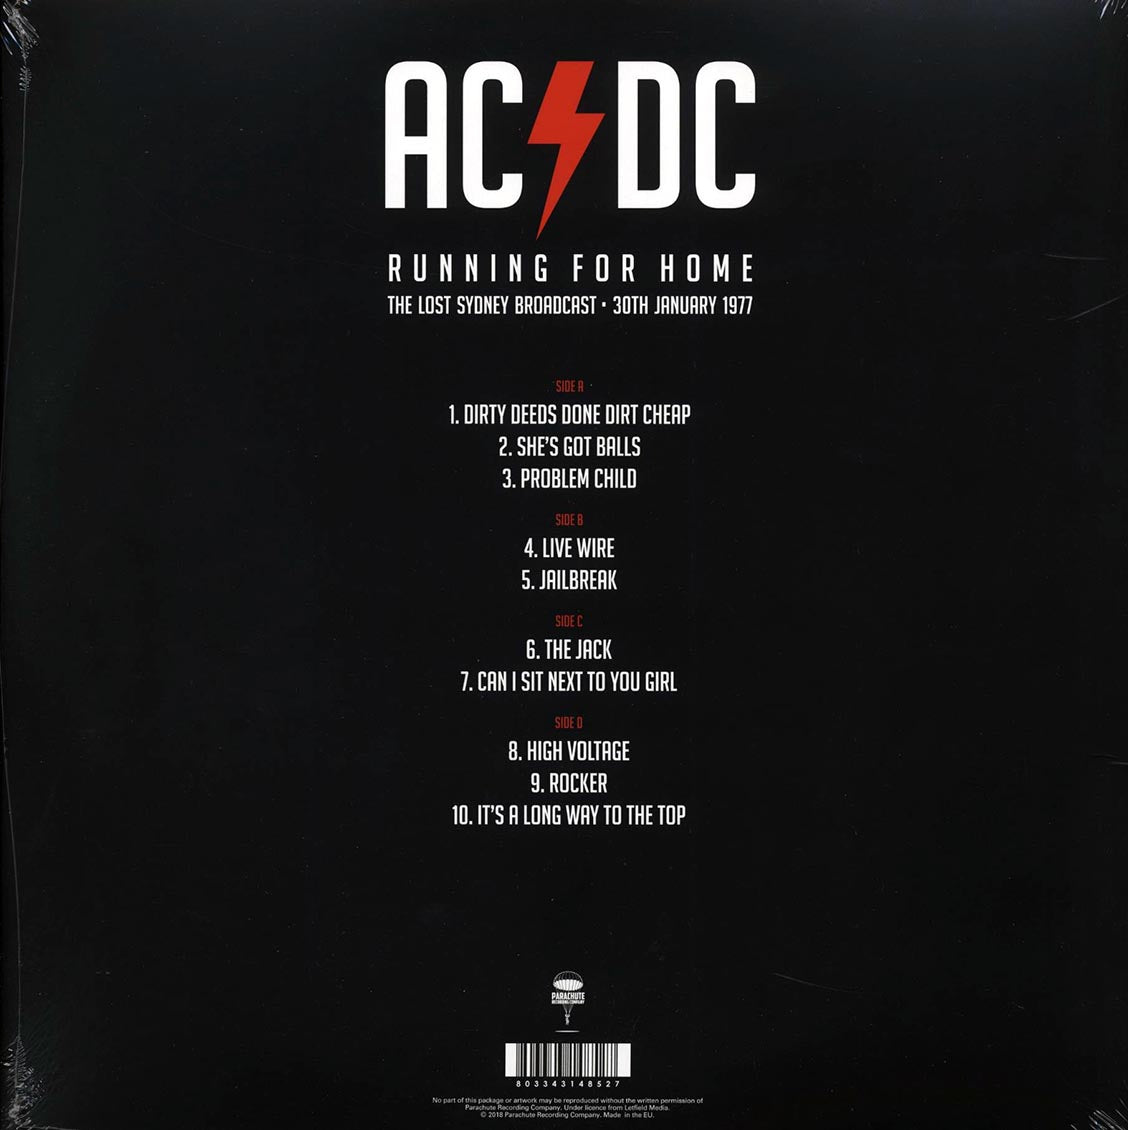 AC/DC - Running For Home: The Lost Sydney Broadcast, 30th January 1977 (2xLP) - Vinyl LP, LP